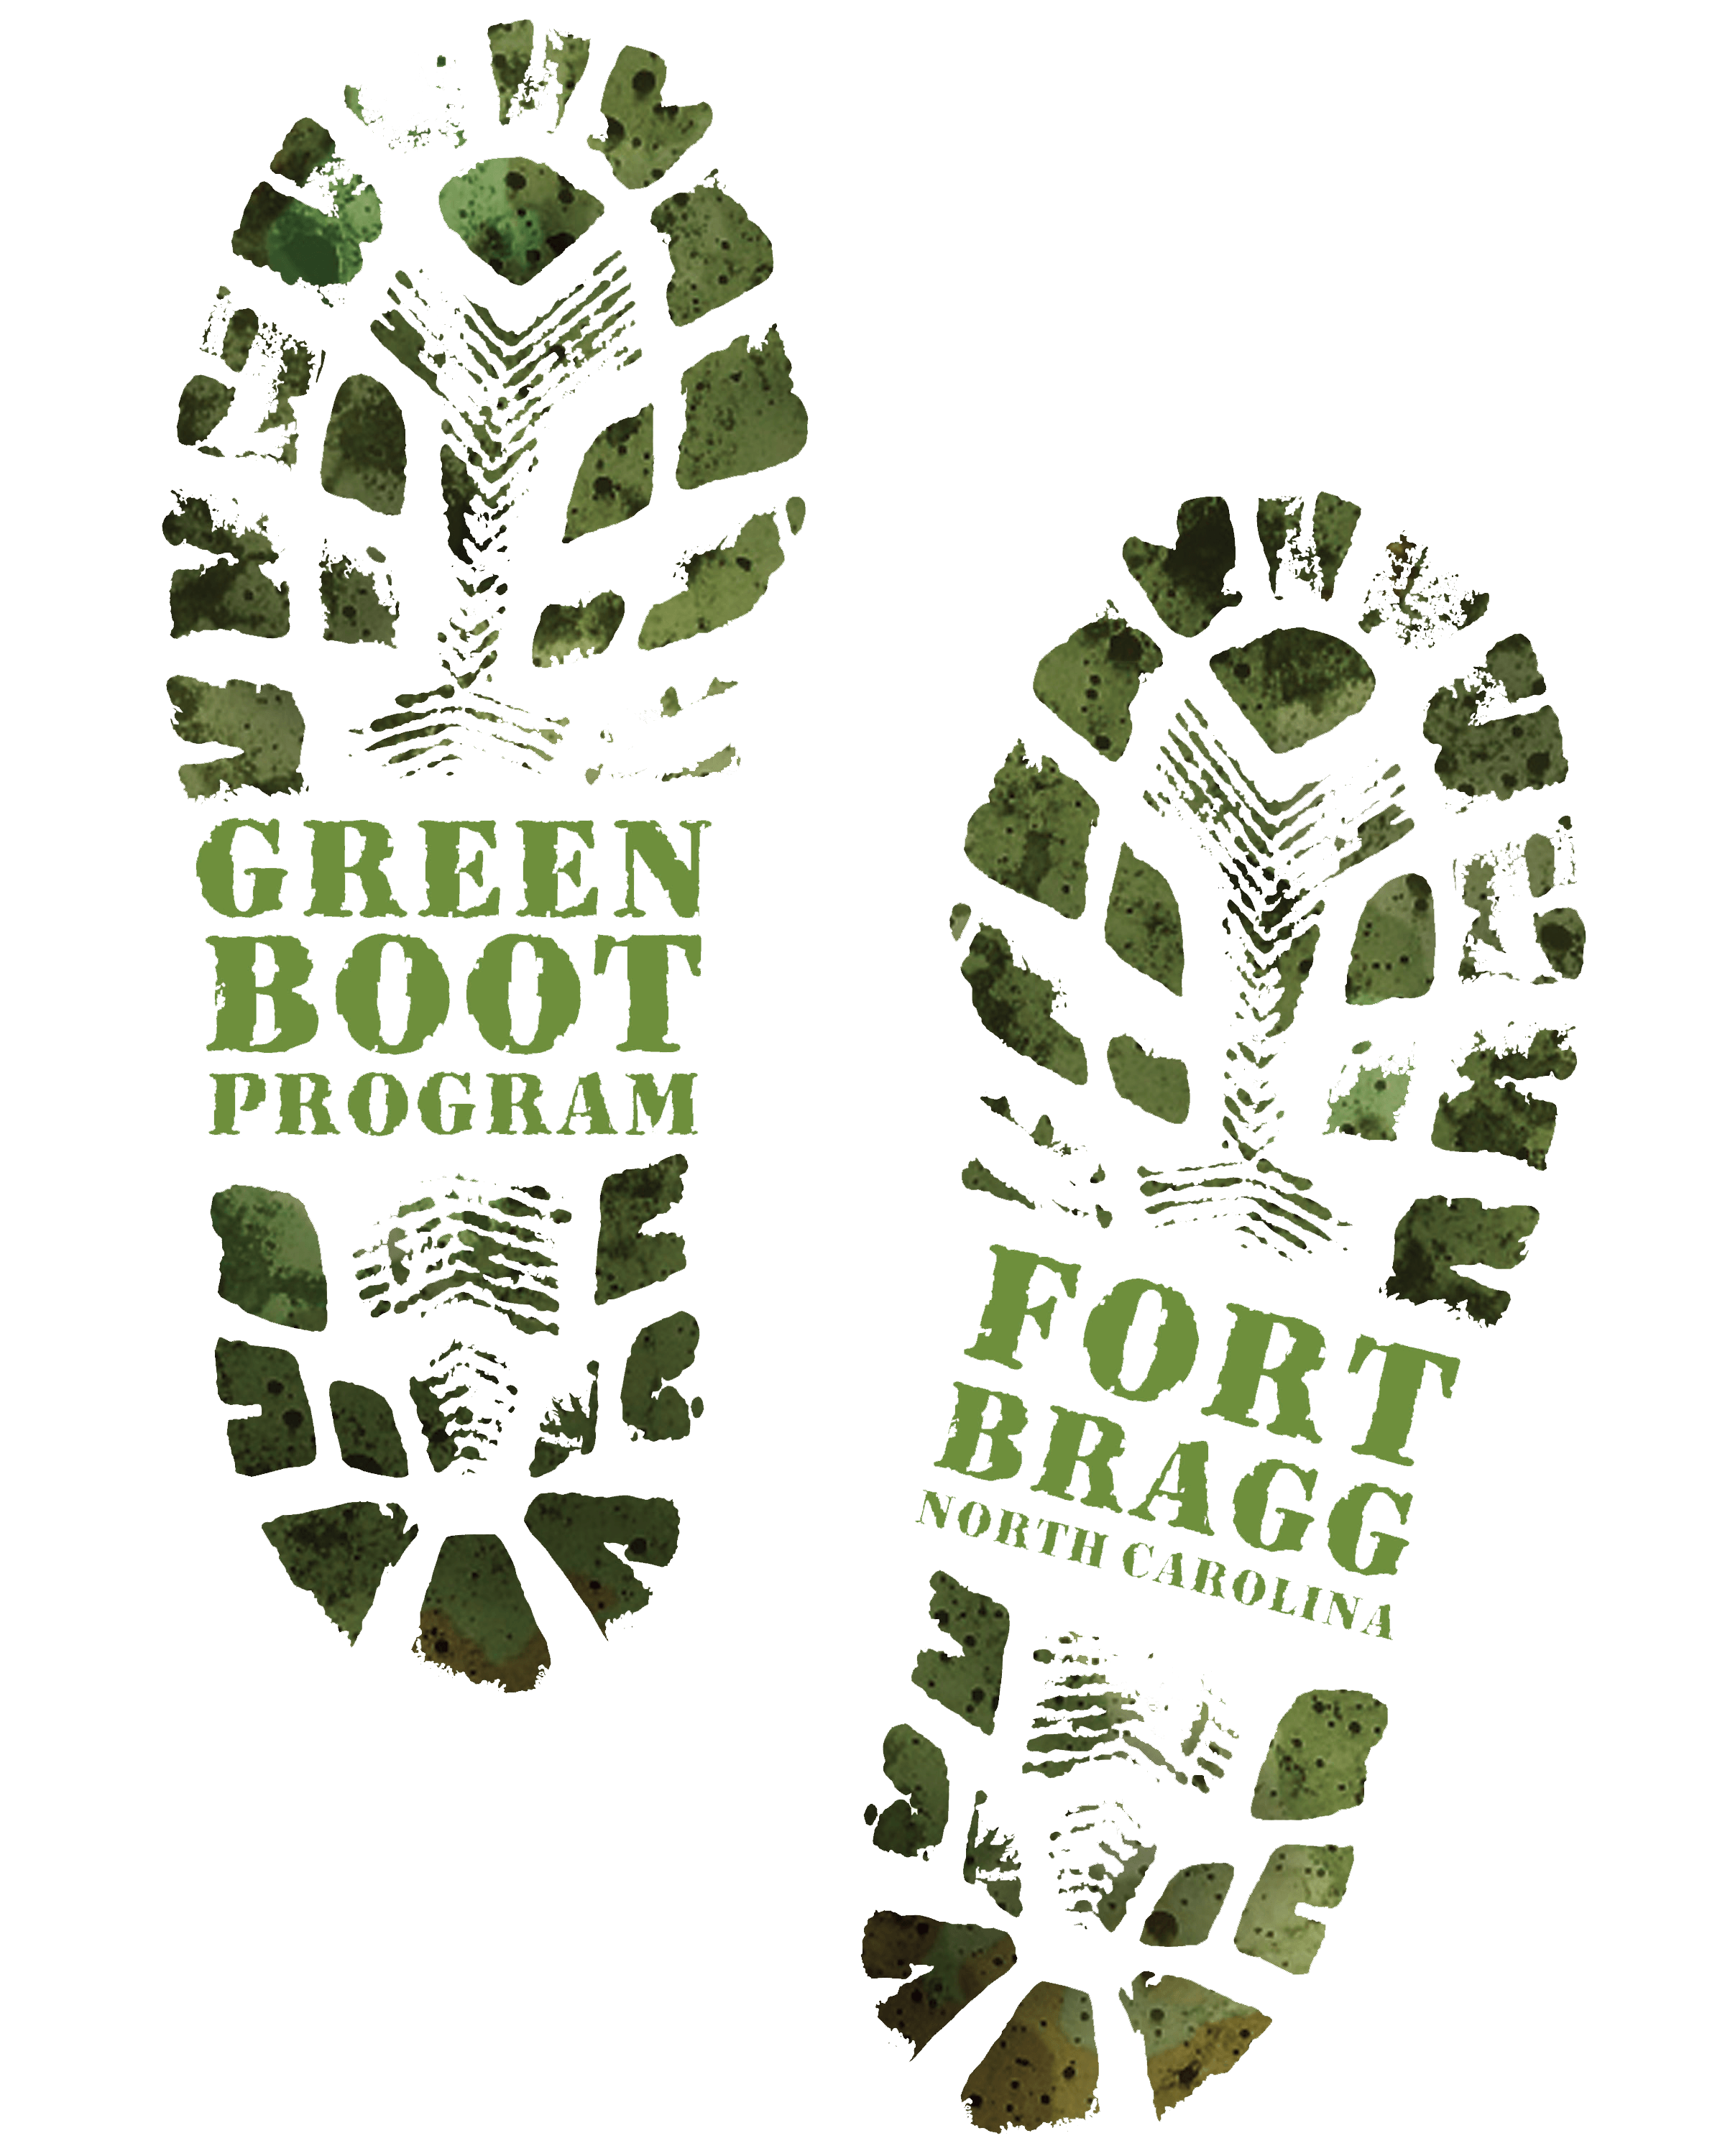 Green Boots Logo - GREEN BOOT PROGRAM. Sustainable Fort Bragg